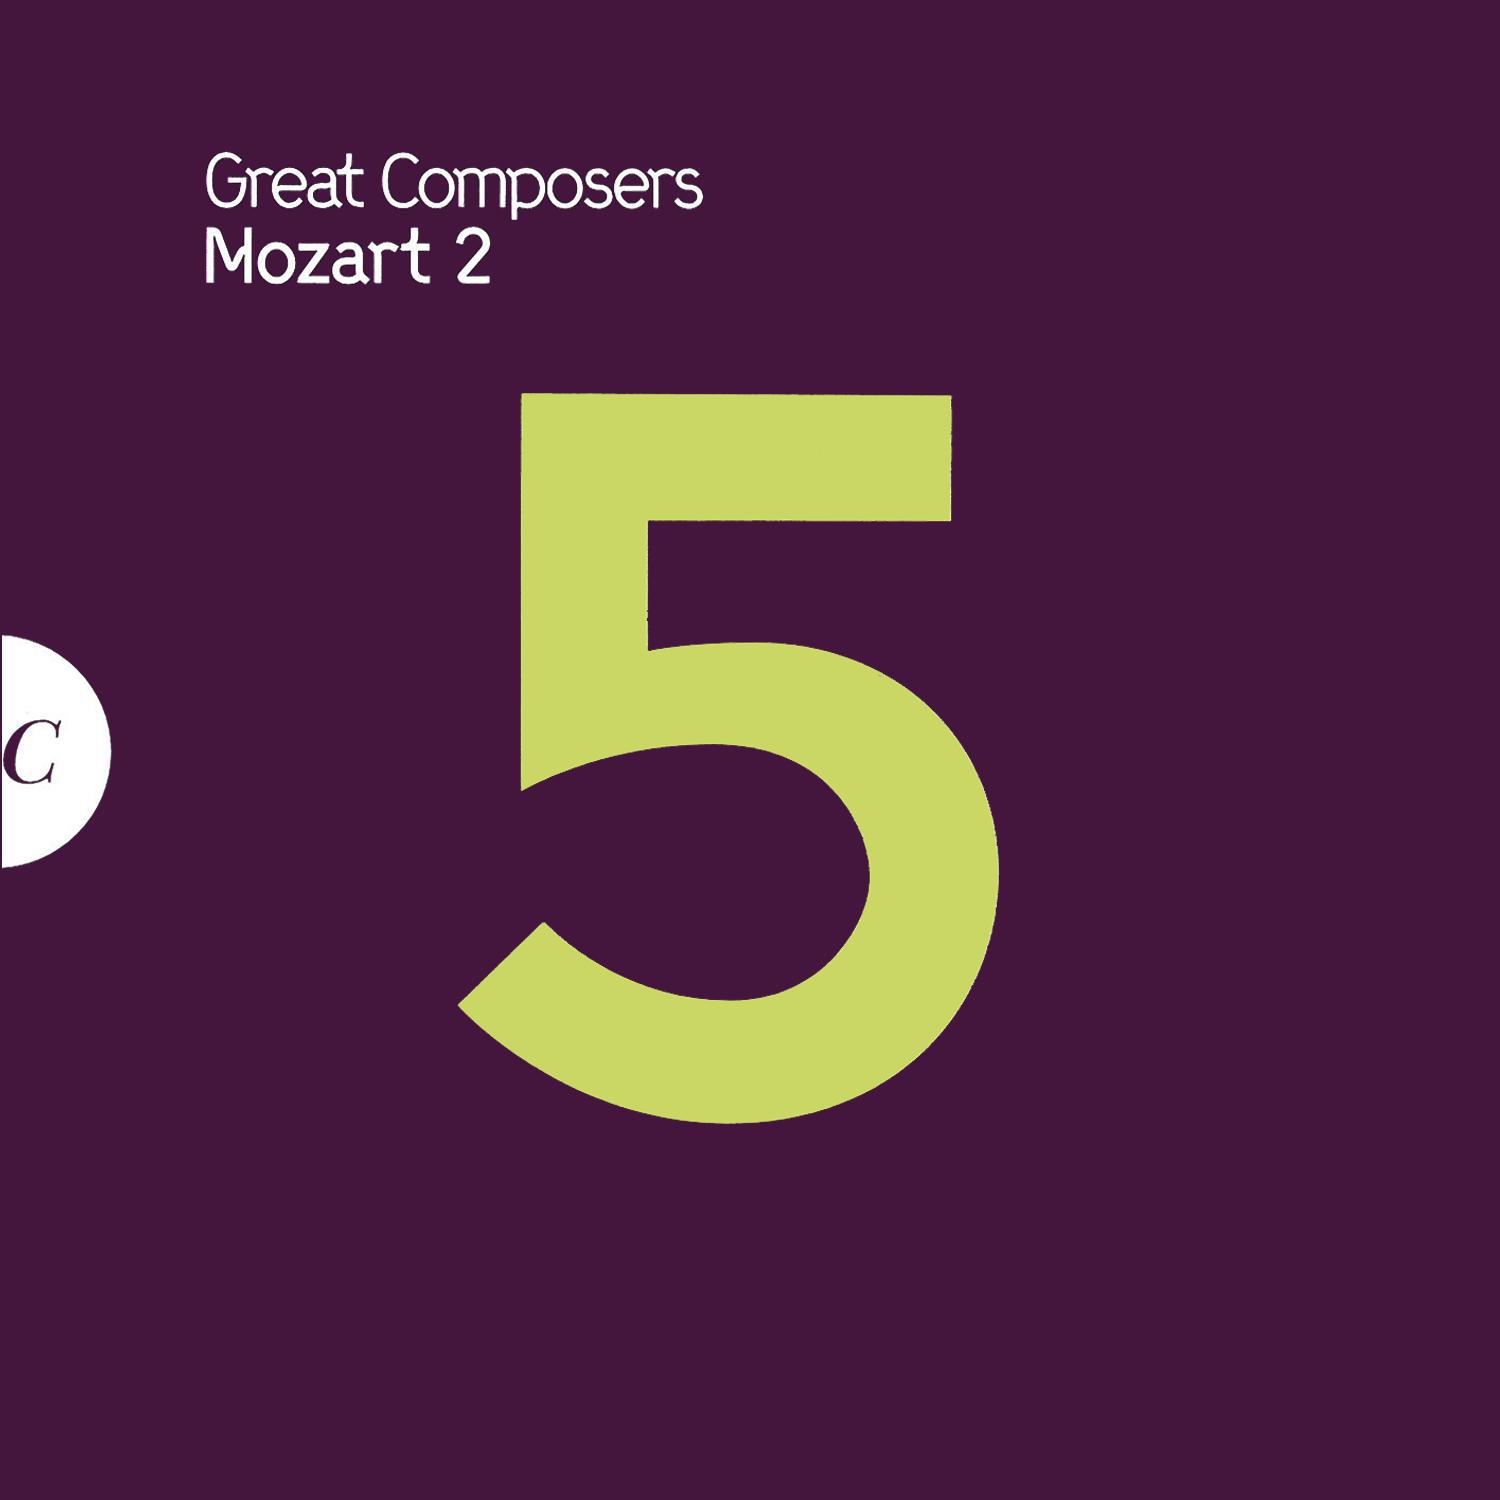 Great Composers - Mozart 2